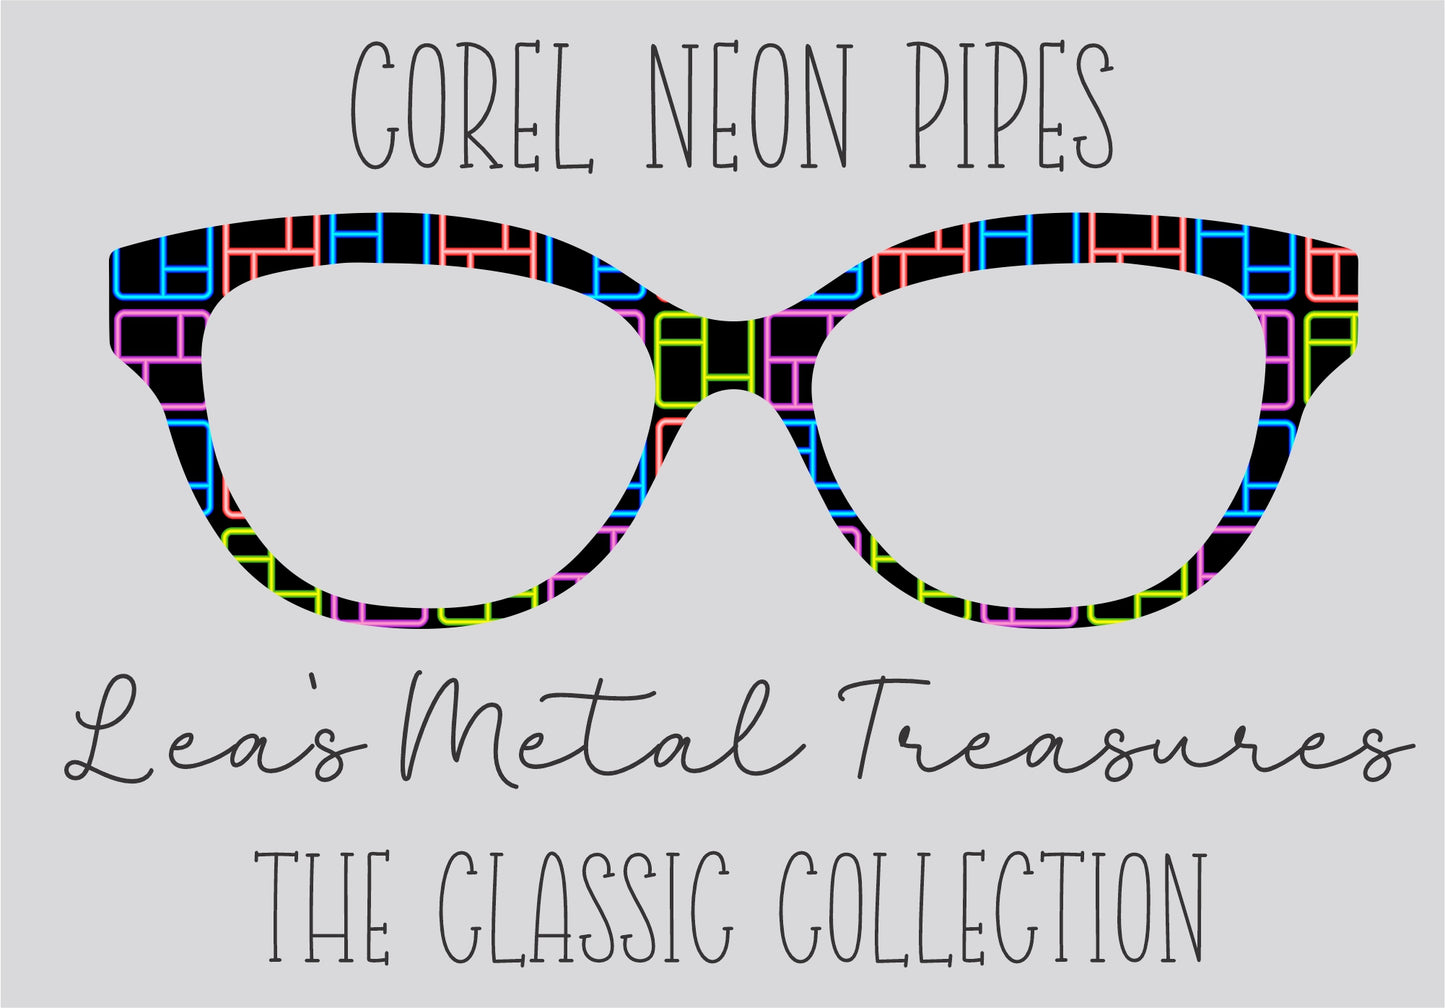 COREL NEON PIPES Eyewear Frame Toppers COMES WITH MAGNETS